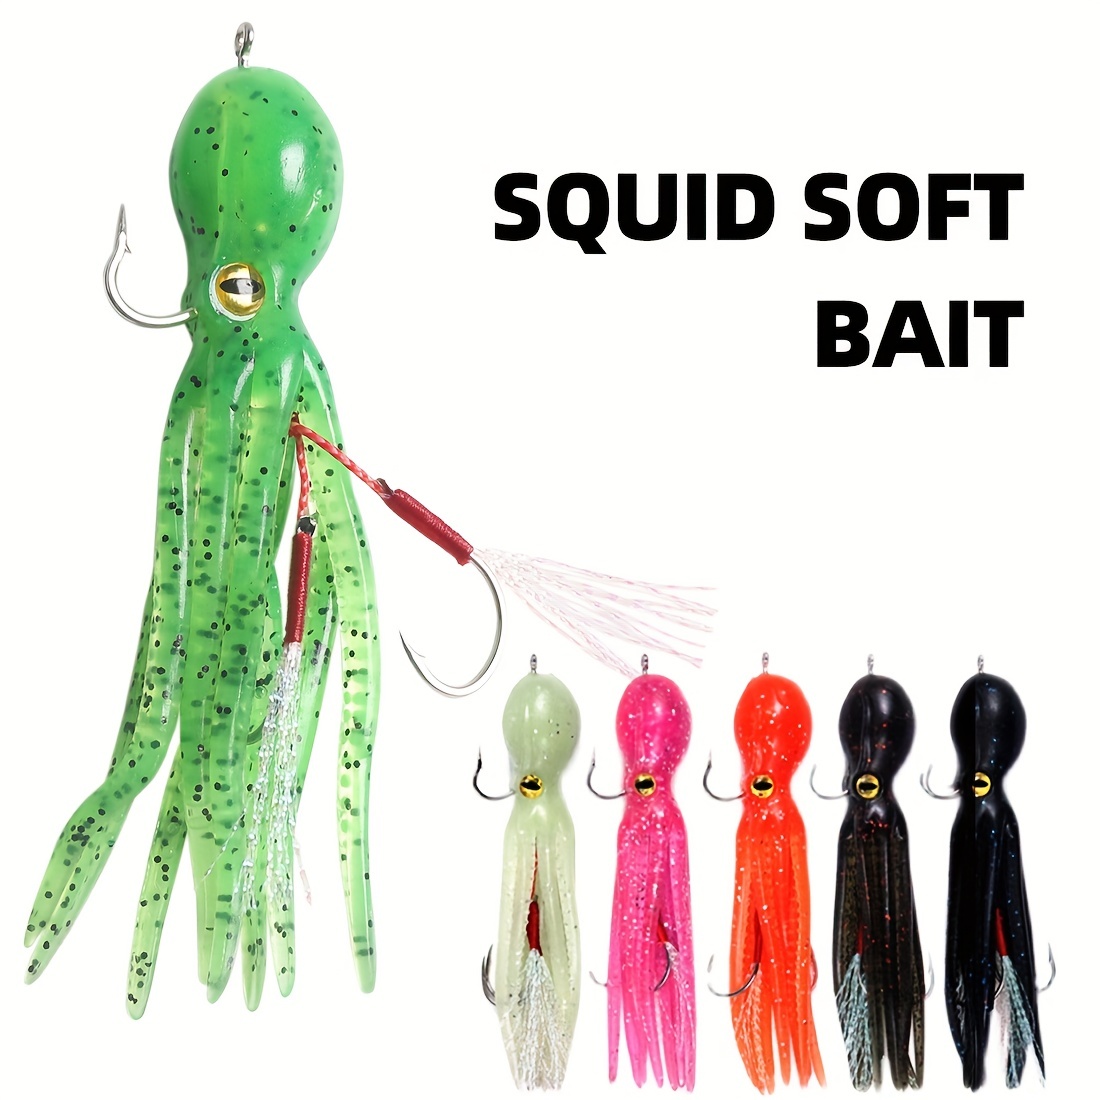 

Glow Squid Skirts Hoochie Lures: Soft Plastic Fishing Lures With Assist Hooks & Lead Jig For Trolling Salmon, Bass, & Trout